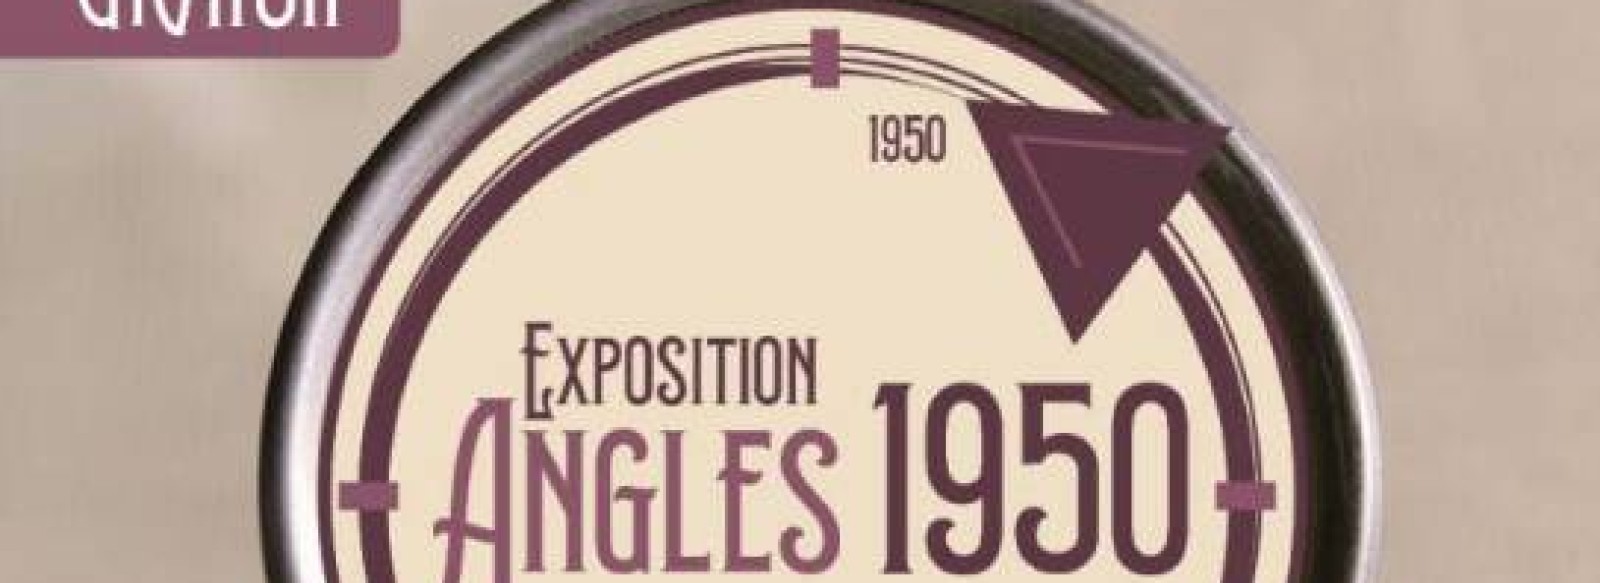 EXPOSITION "ANGLES 1950"